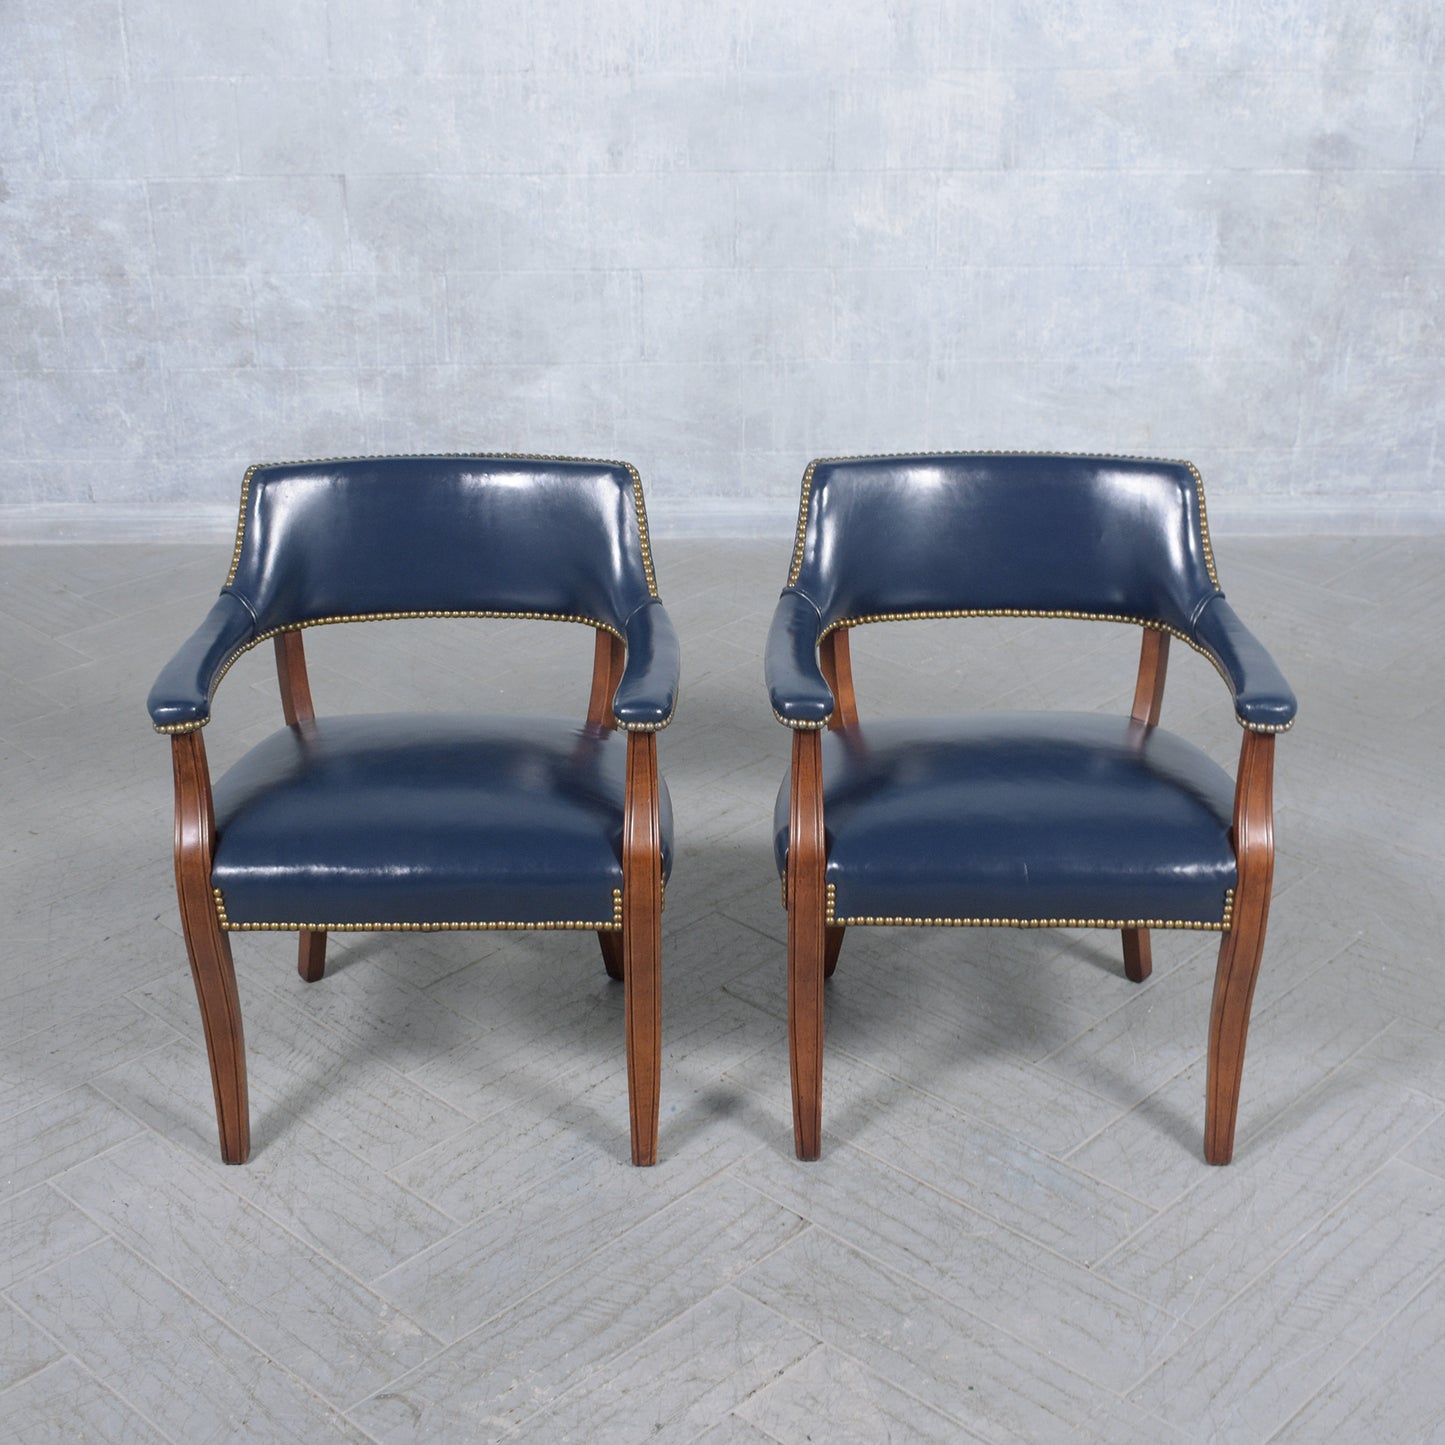 Restored Mahogany Barrel Armchairs with Navy Blue Leather - Vintage Elegance